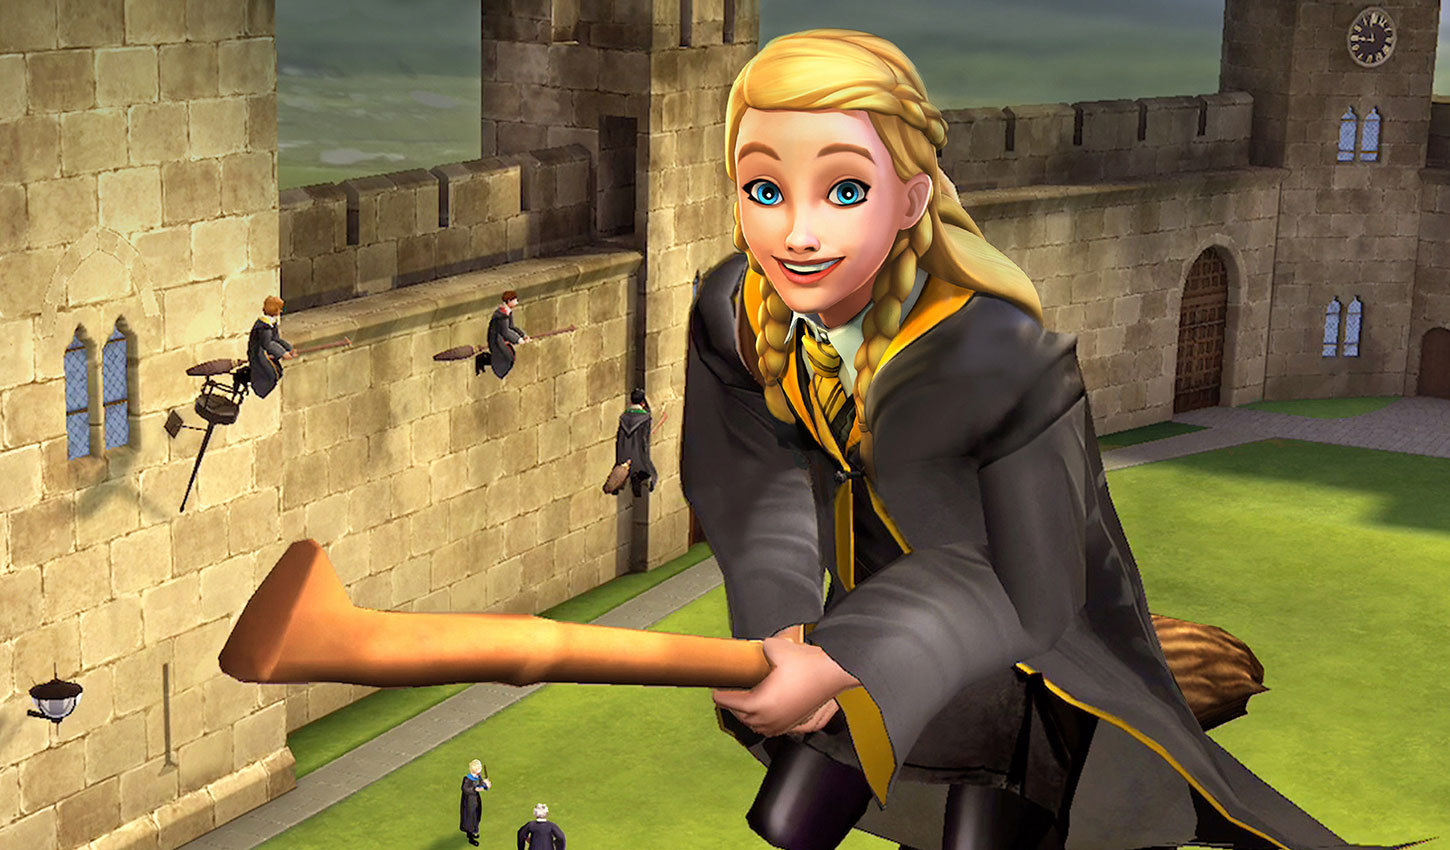 Harry Potter: Hogwarts Mystery Summons More Than $100 Million Since Launch